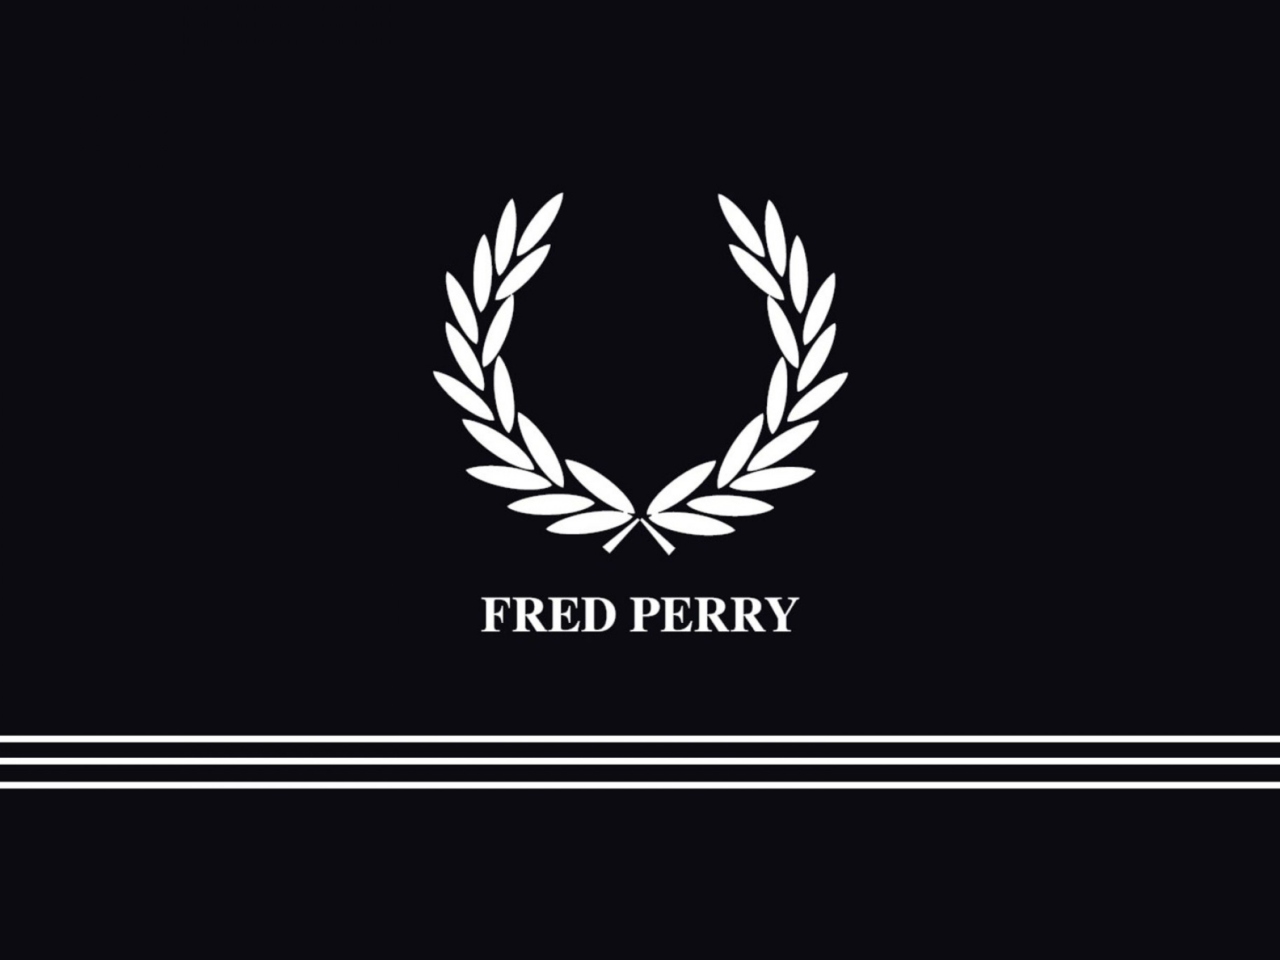 Fred Perry wallpaper 1280x960